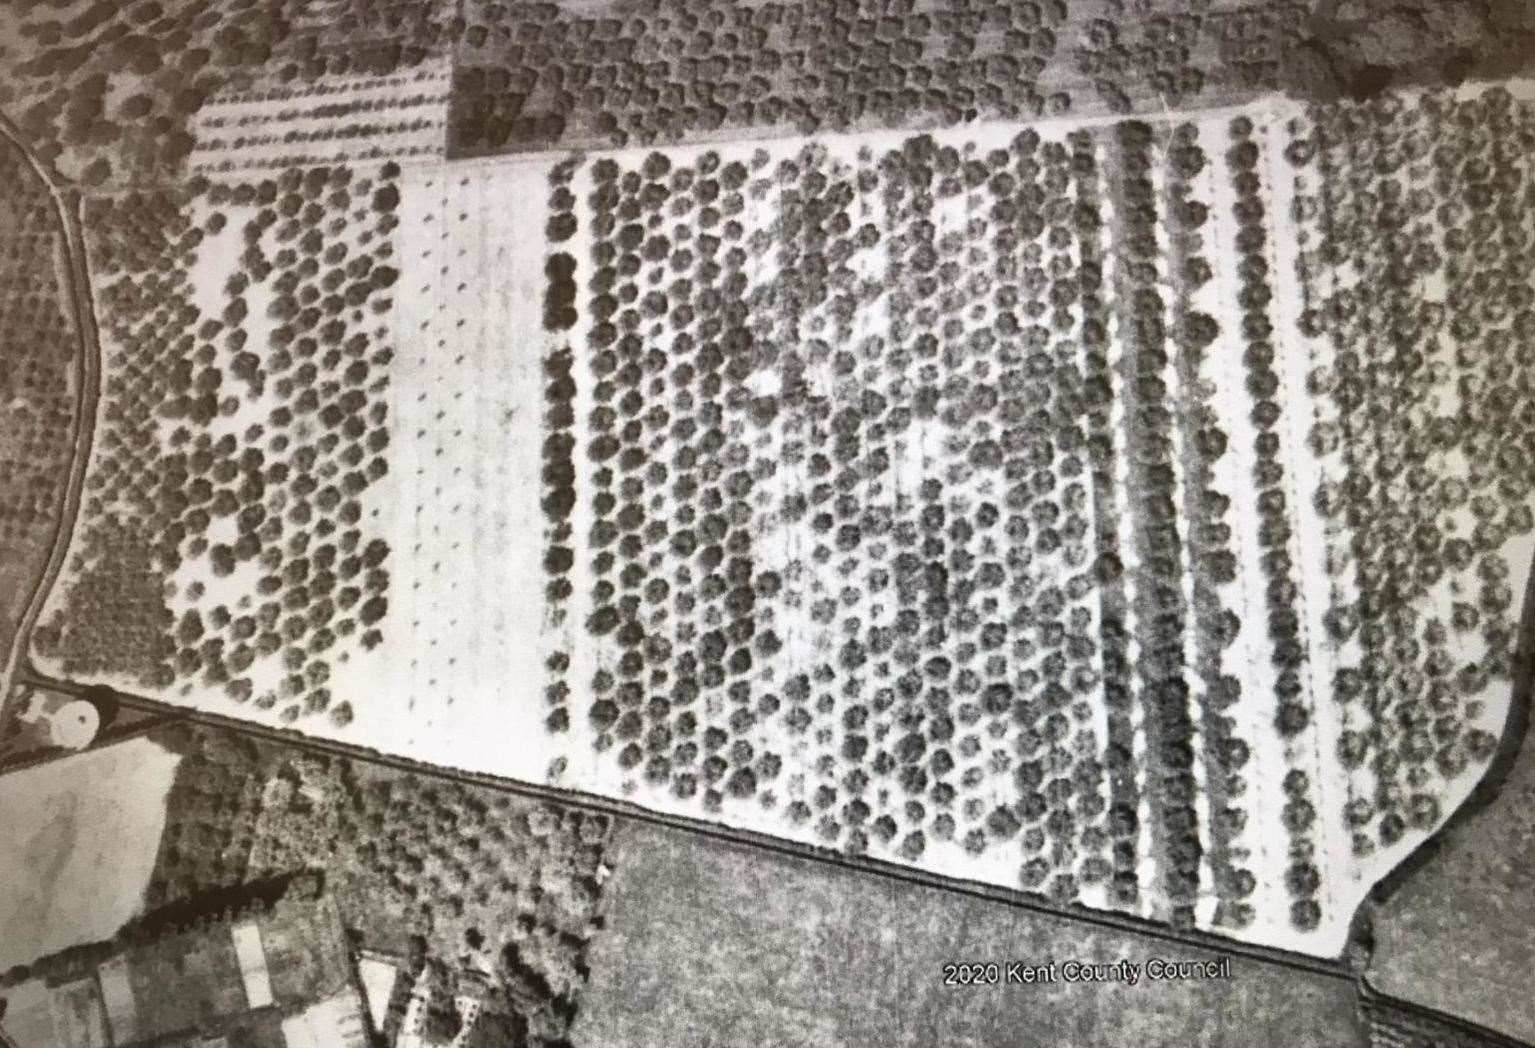 The pea field site as seen in 1960 before houses were built on adjacent land